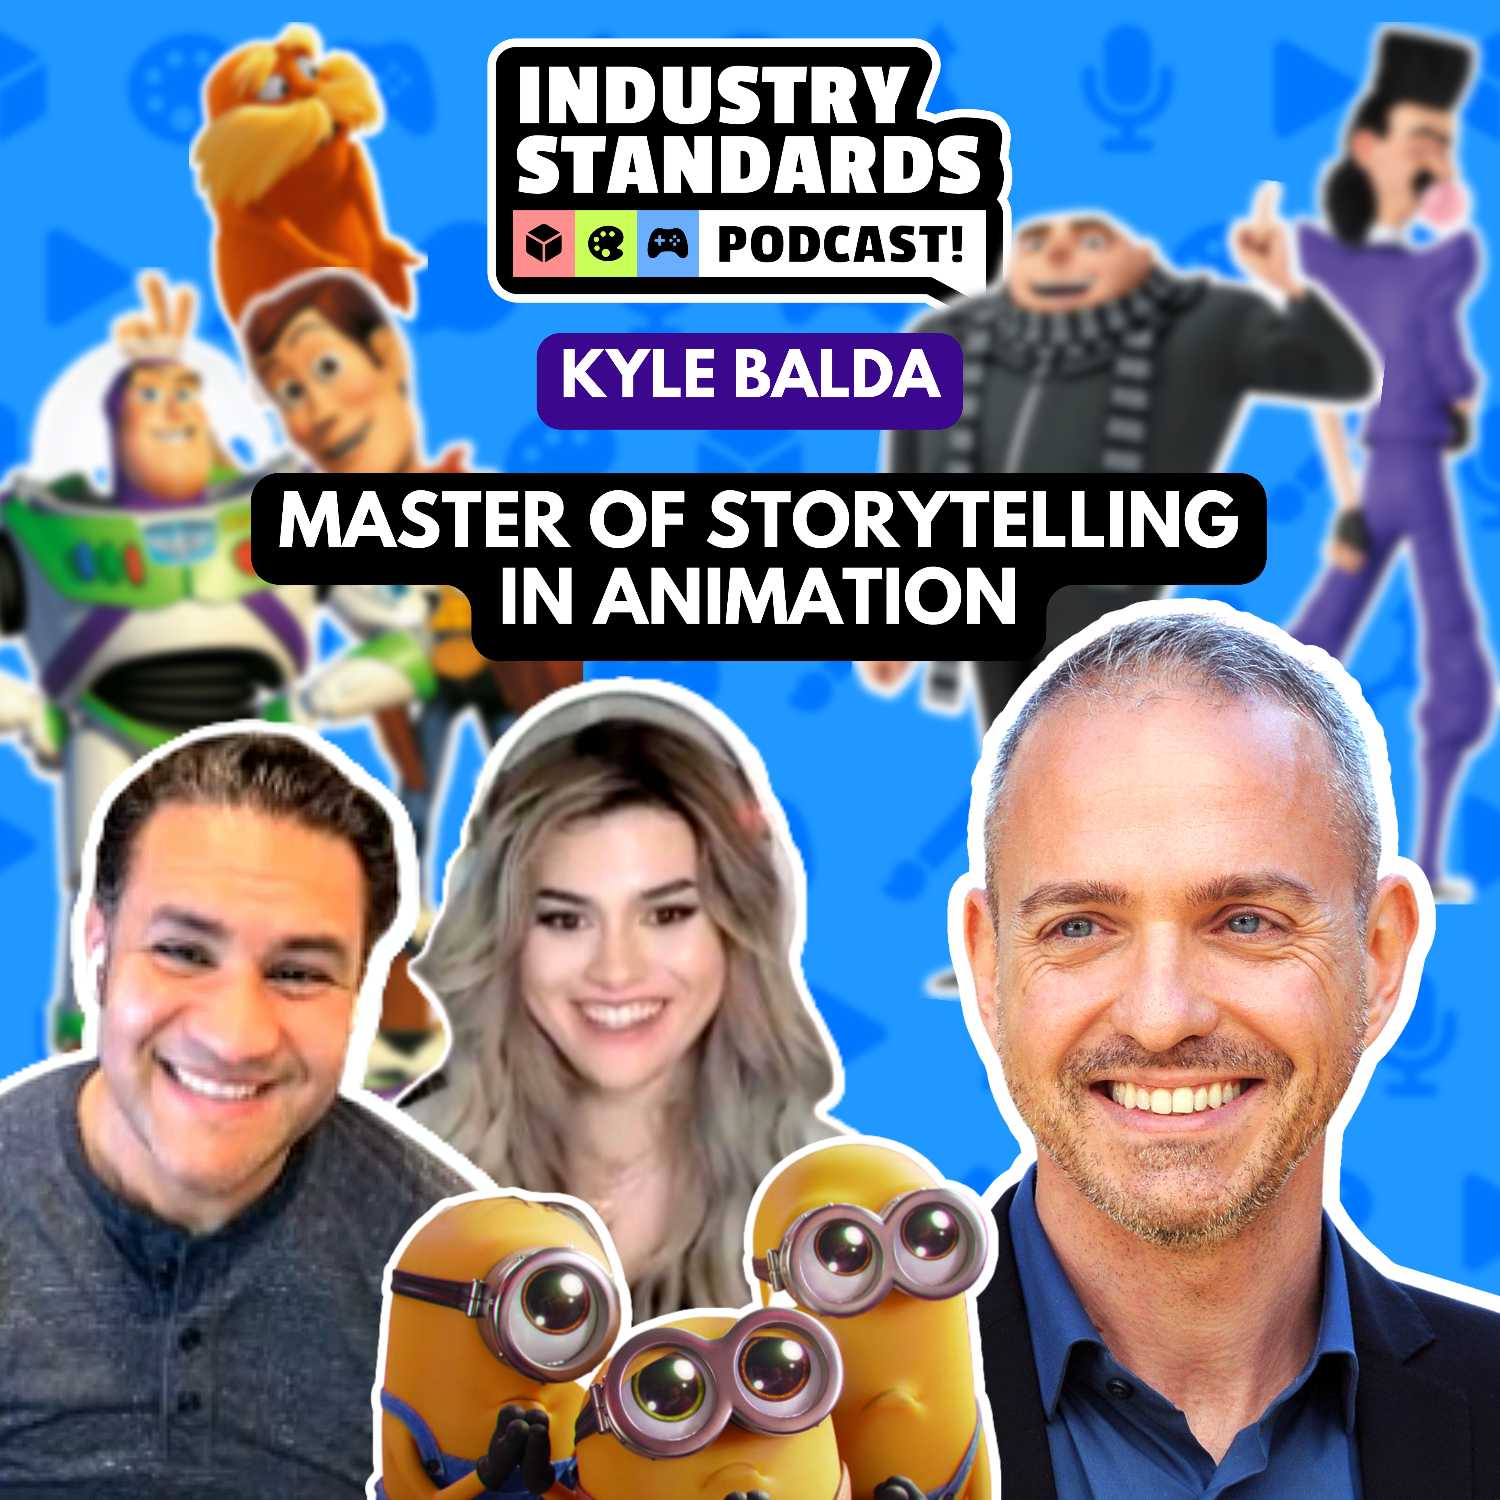 Kyle Balda, Animator and Film Director, on the Power of Storytelling in Animation (Despicable Me, Minions)